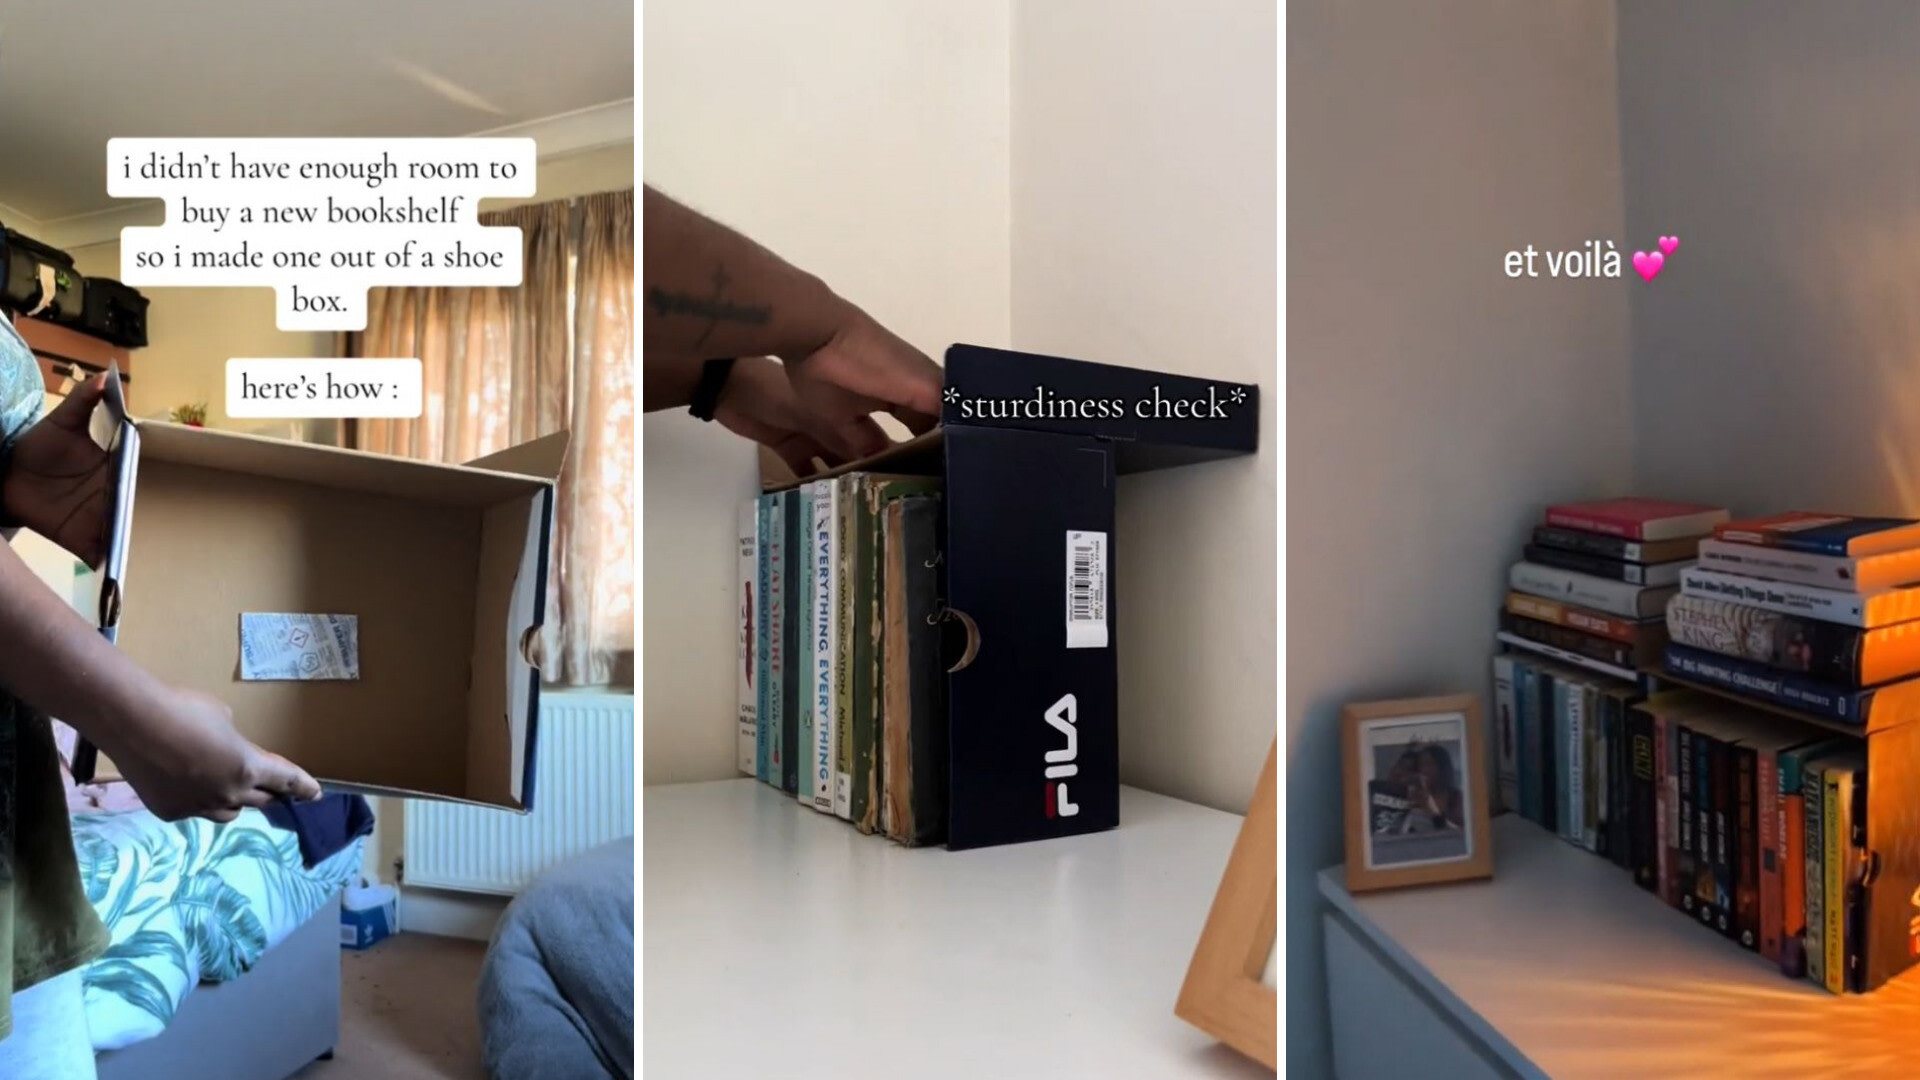 Book lover demonstrates how to cleverly use empty shoe boxes to upgrade limited space: “It’s so ingenious”